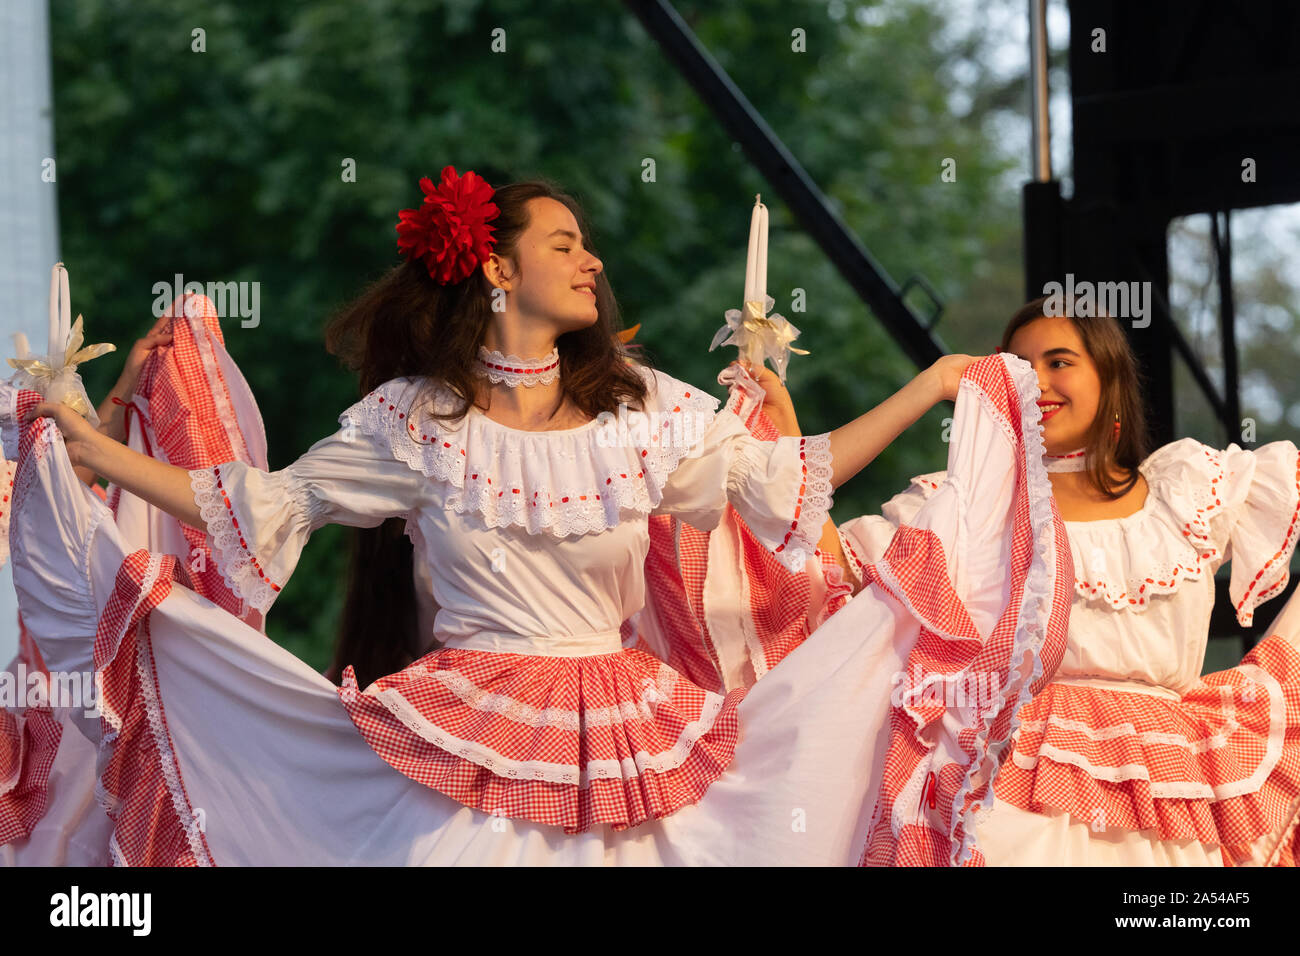 St. Louis, Missouri, USA - August 25, 2019: Festival of Nations, Tower Grove Park, members of the Grupo Atlantico, wearing traditional clothing, perfo Stock Photo